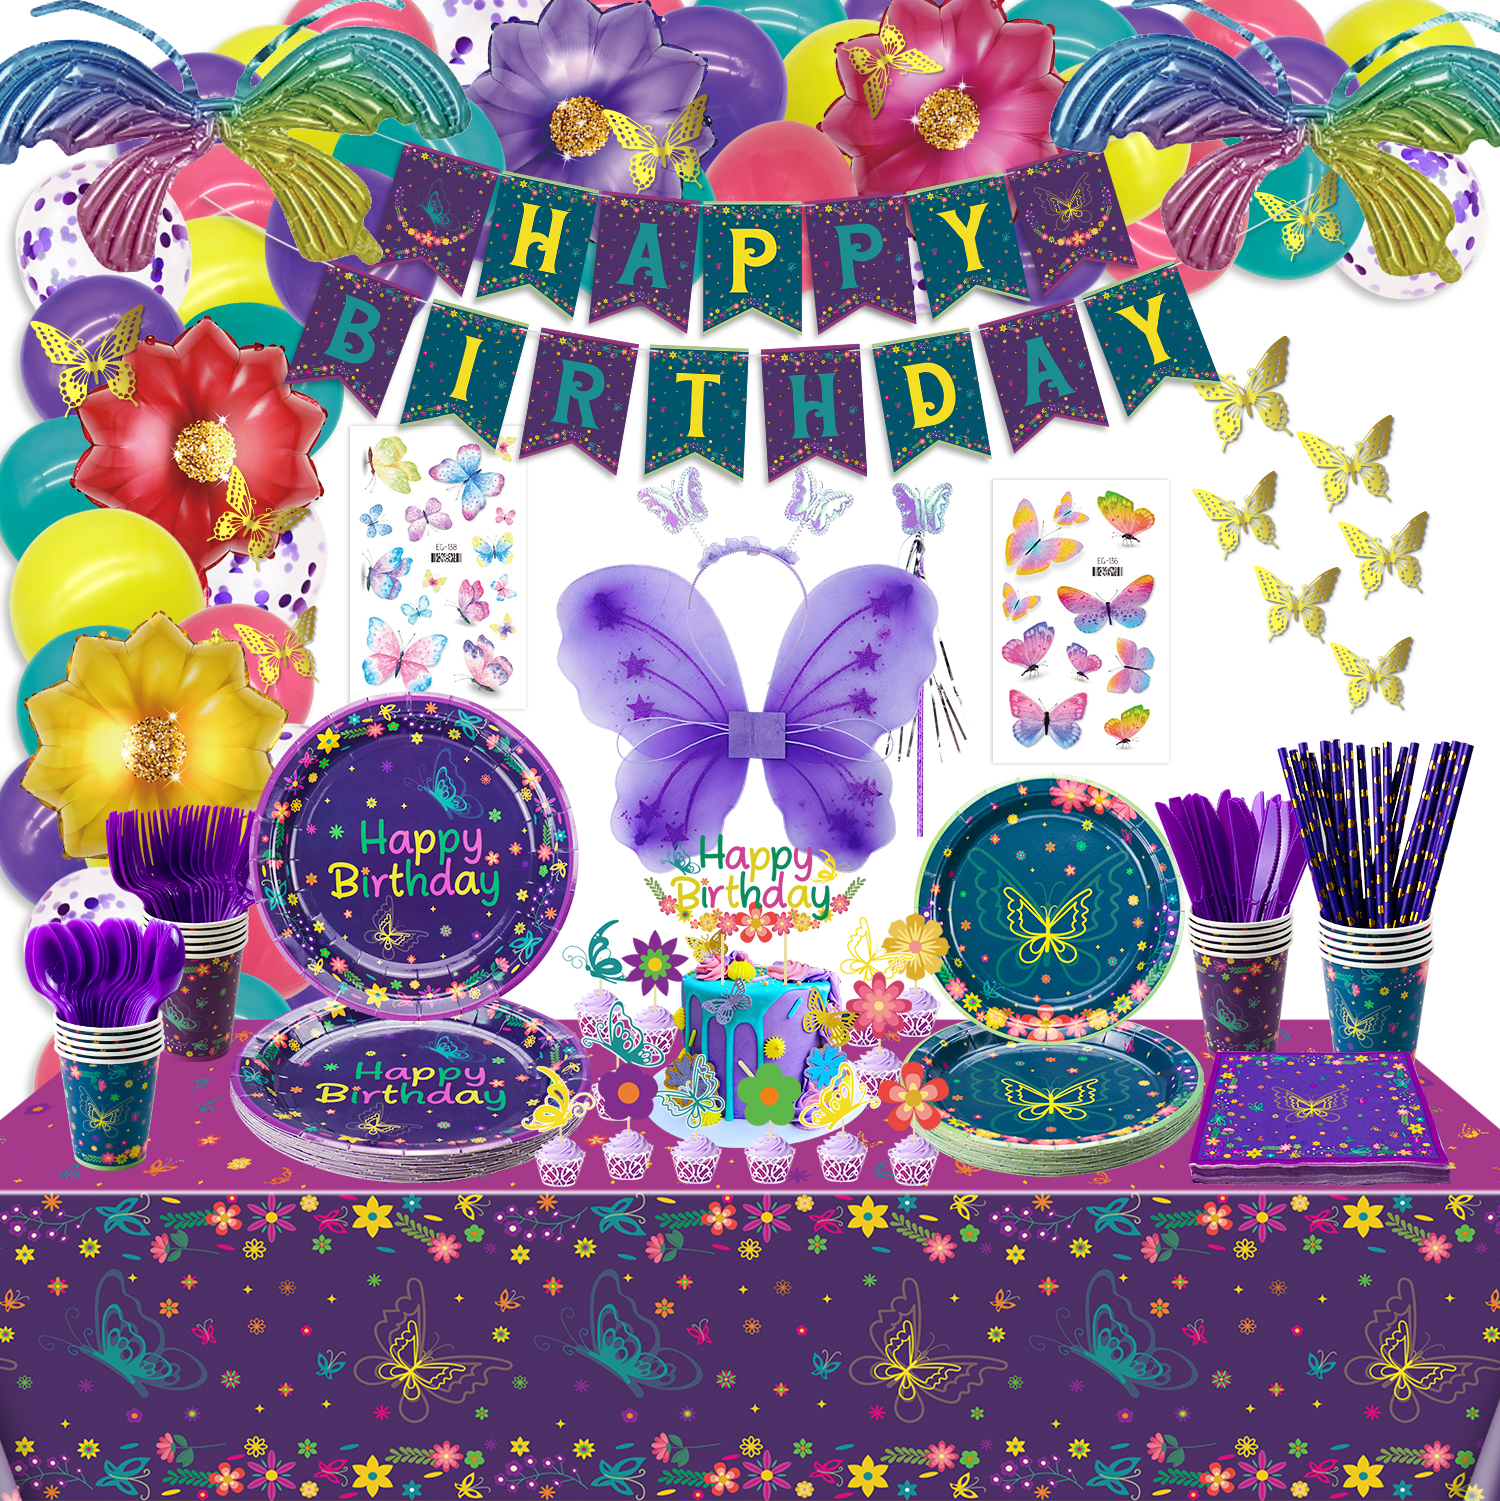 255 Pcs Movie Butterfly Birthday Decorations - Plates, Tablecloth, Balloons, Banner, Temporary Tattoos, Butterfly Stickers, Tableware, Cups, Butterfly Wing Set for Magic Party Supplies - image 1 of 8